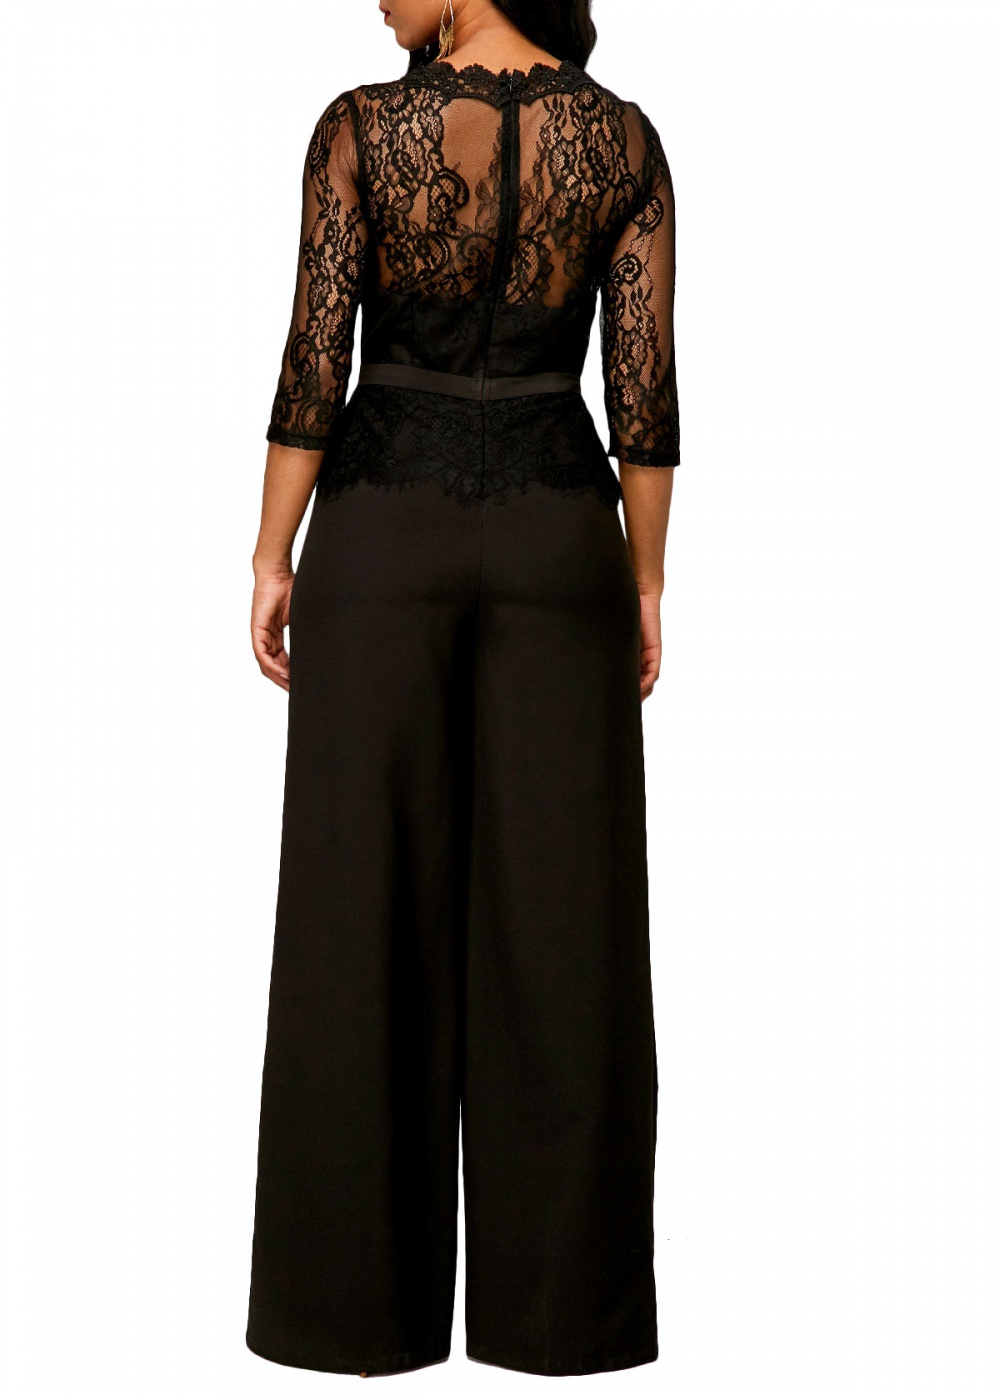 Sexy European style lace summer jumpsuit for women